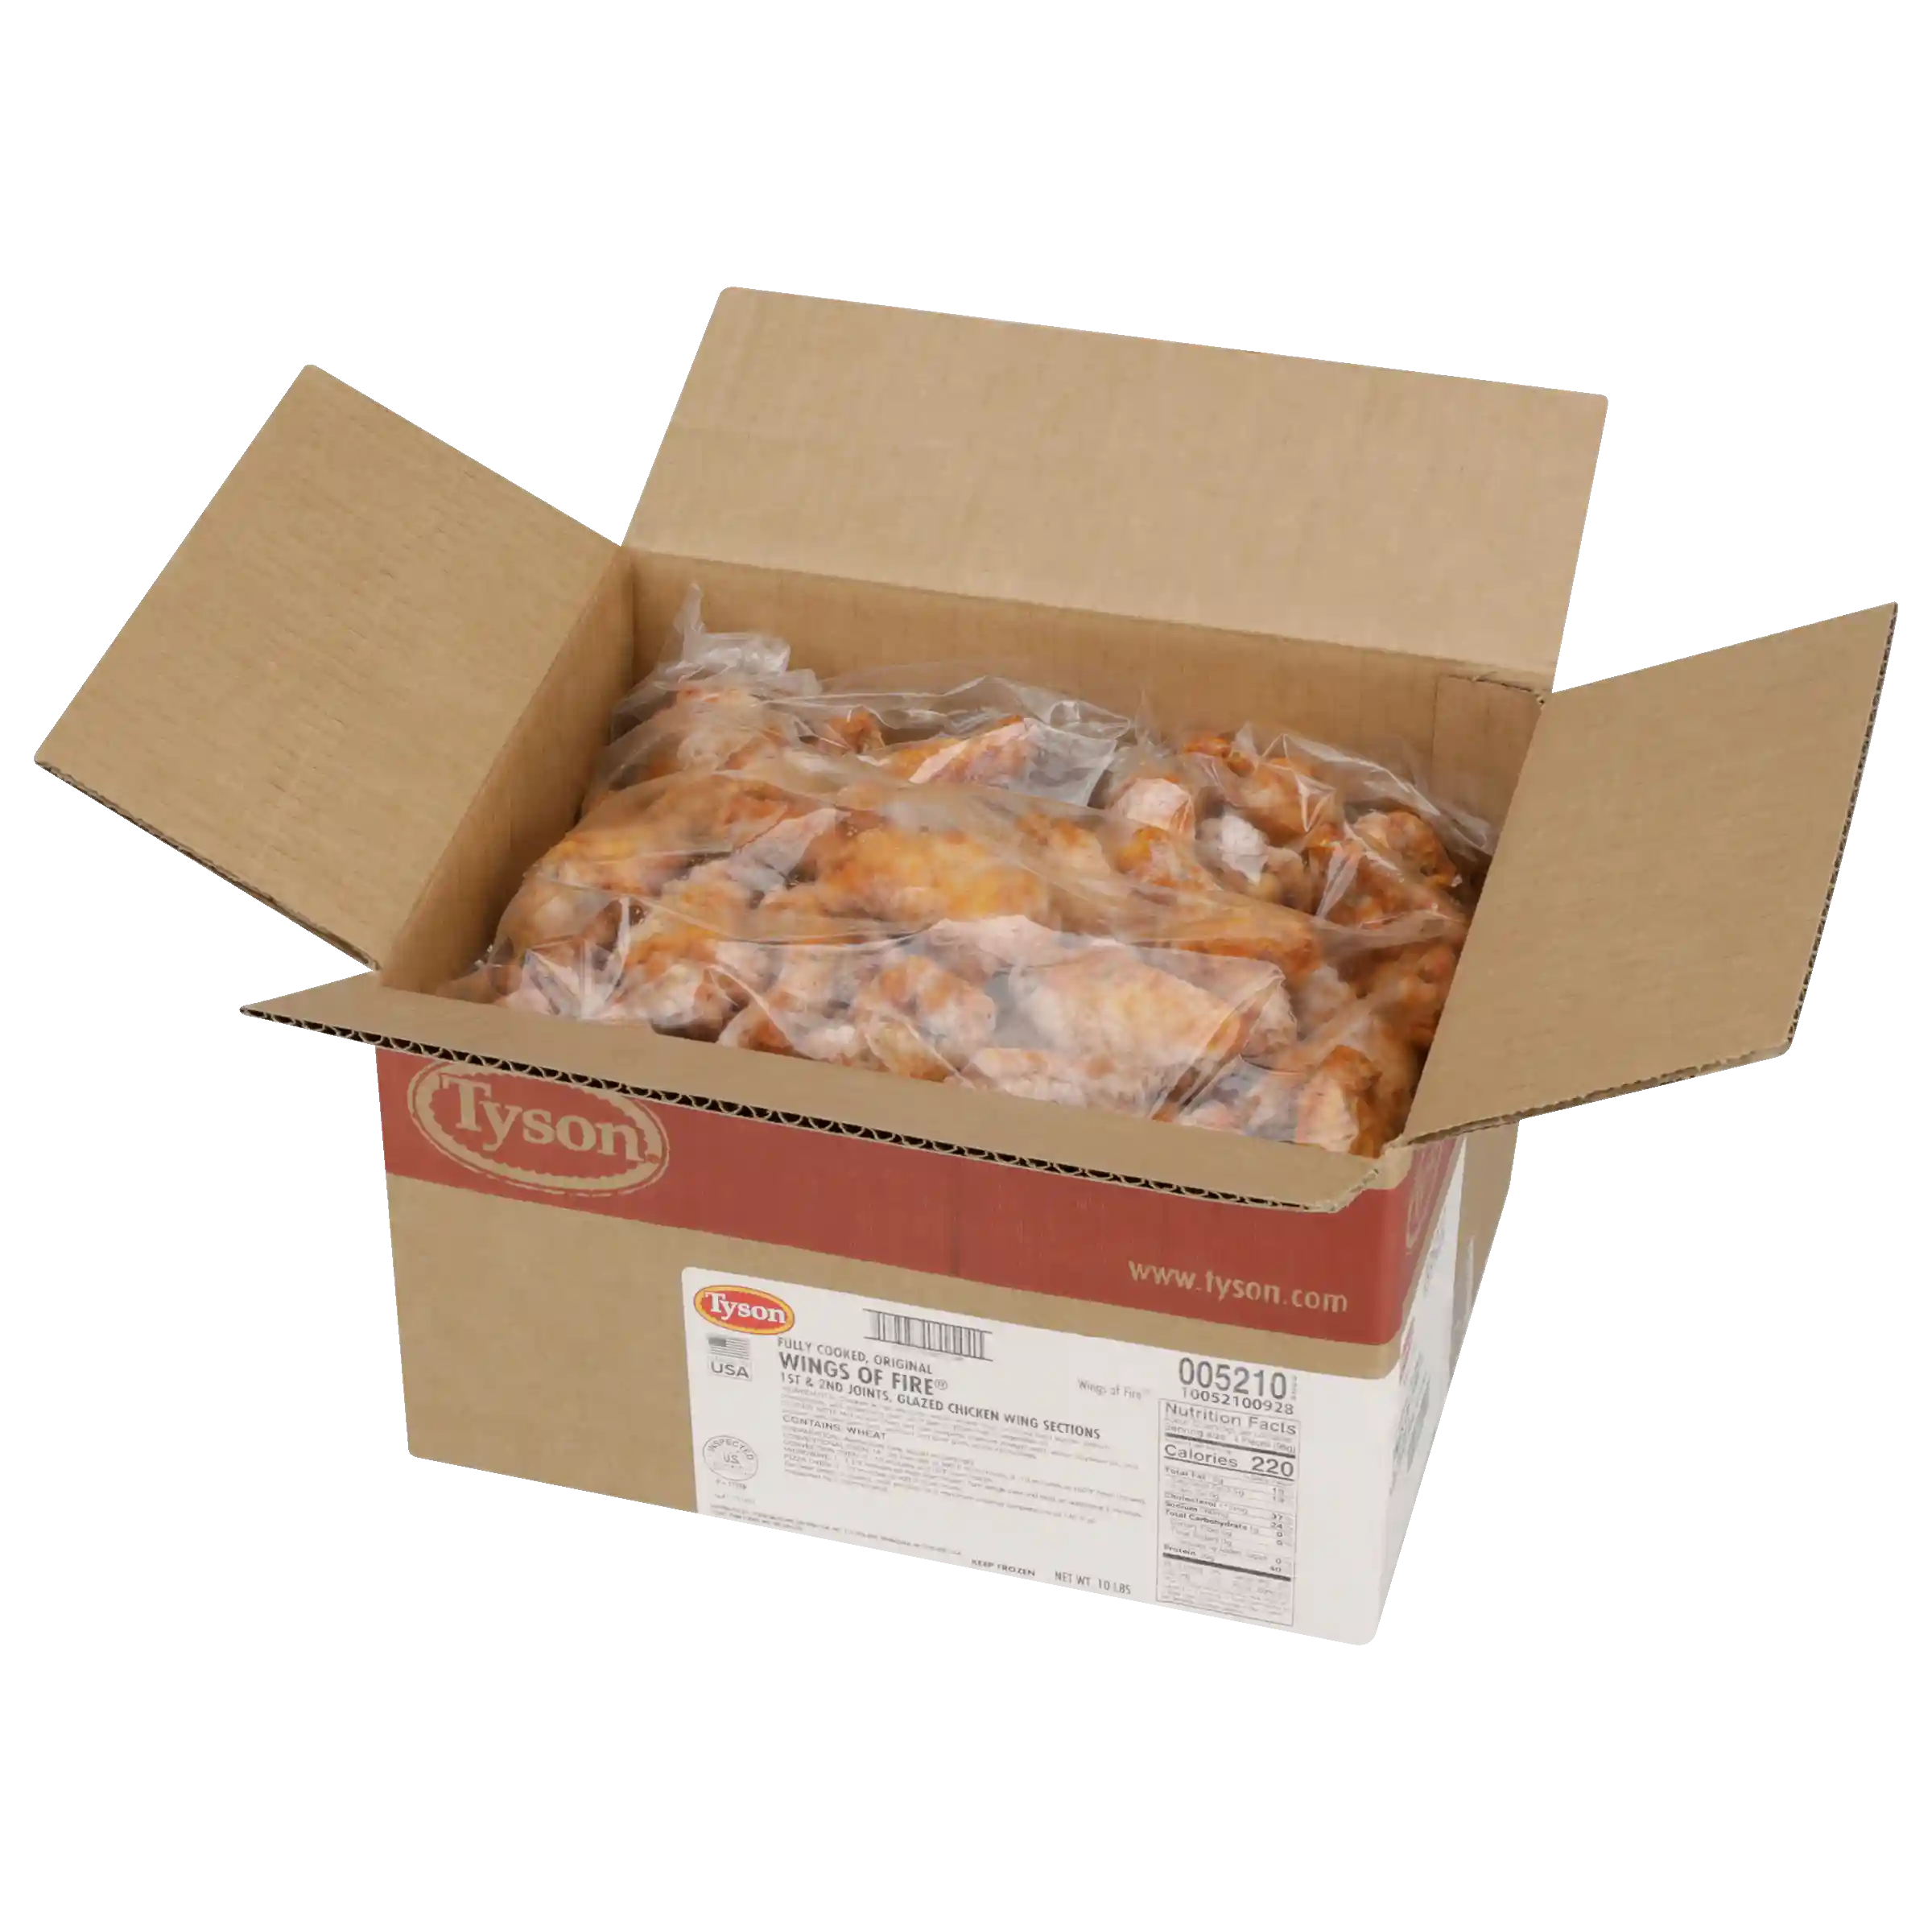 Tyson® Wings of Fire® Fully Cooked Glazed Bone-In Chicken Wing Sections, Small_image_31